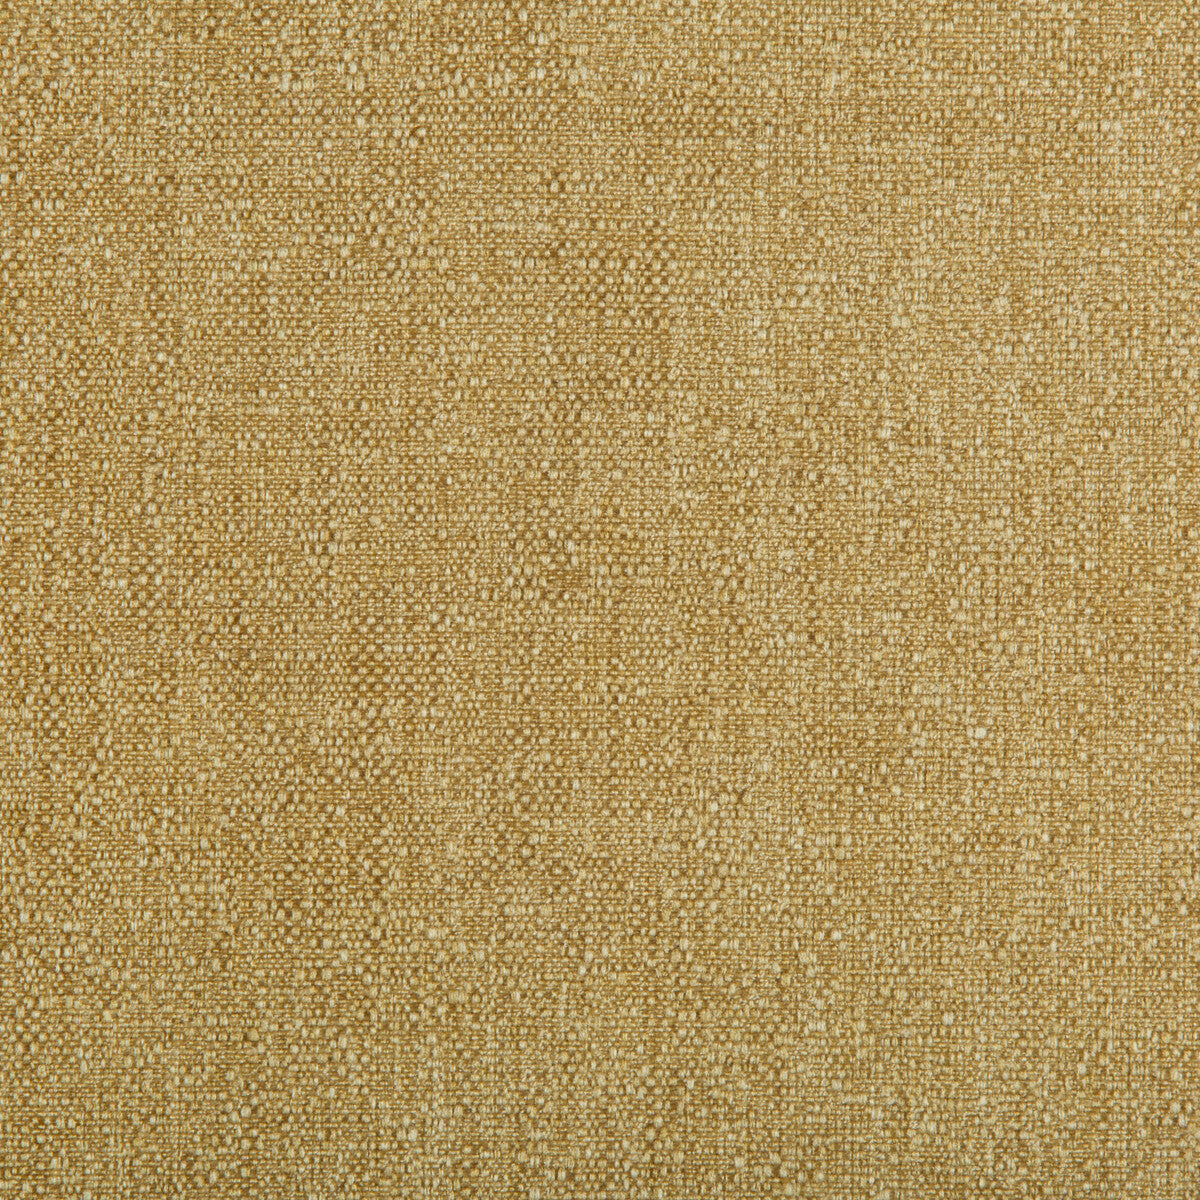 Kravet Smart fabric in 35391-4 color - pattern 35391.4.0 - by Kravet Smart in the Performance Crypton Home collection